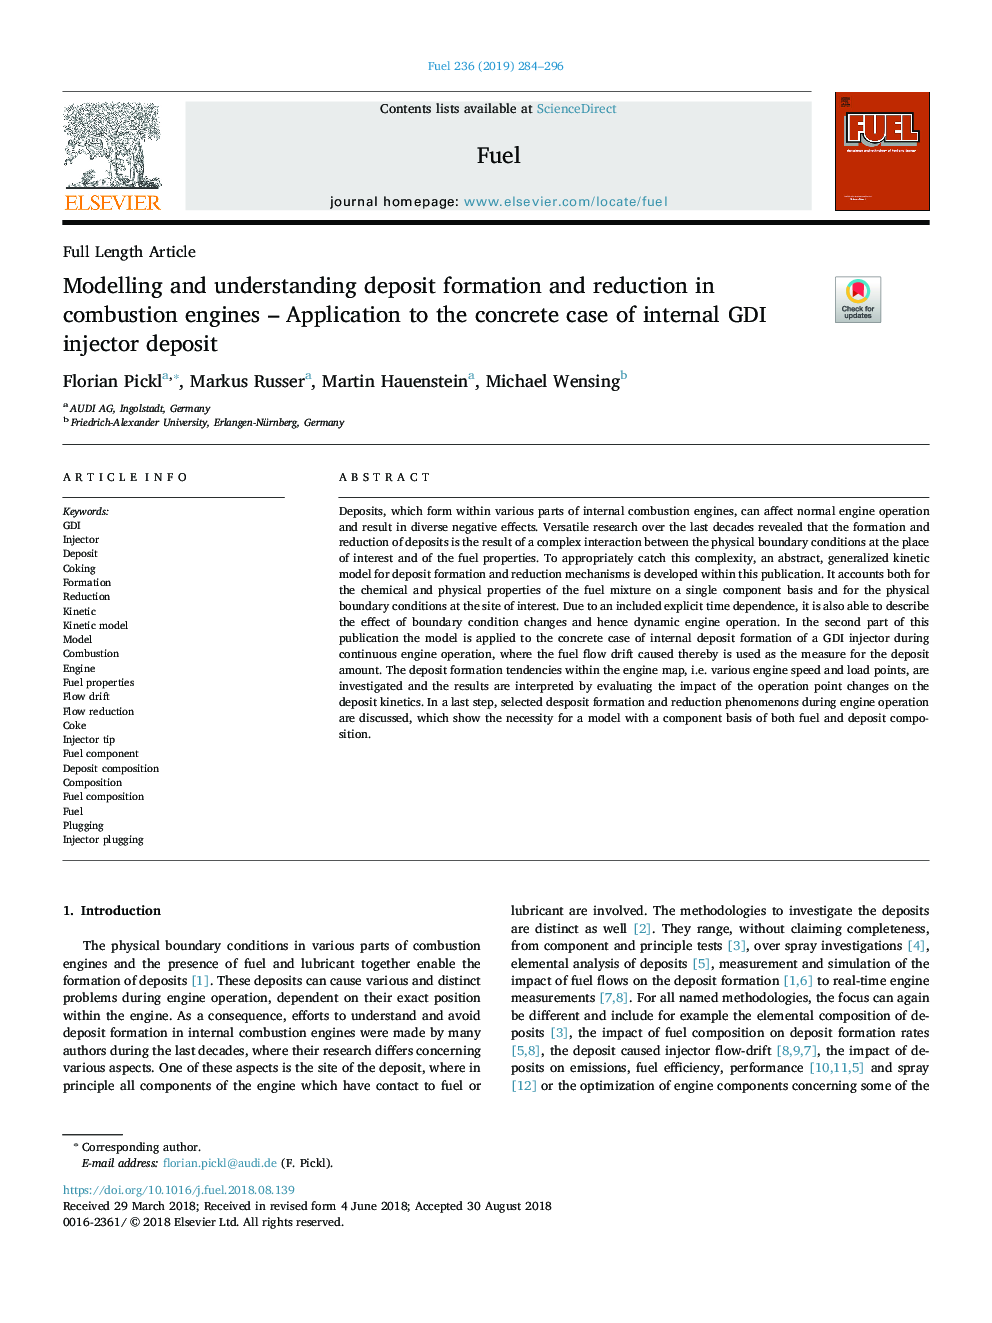 Modelling and understanding deposit formation and reduction in combustion engines - Application to the concrete case of internal GDI injector deposit